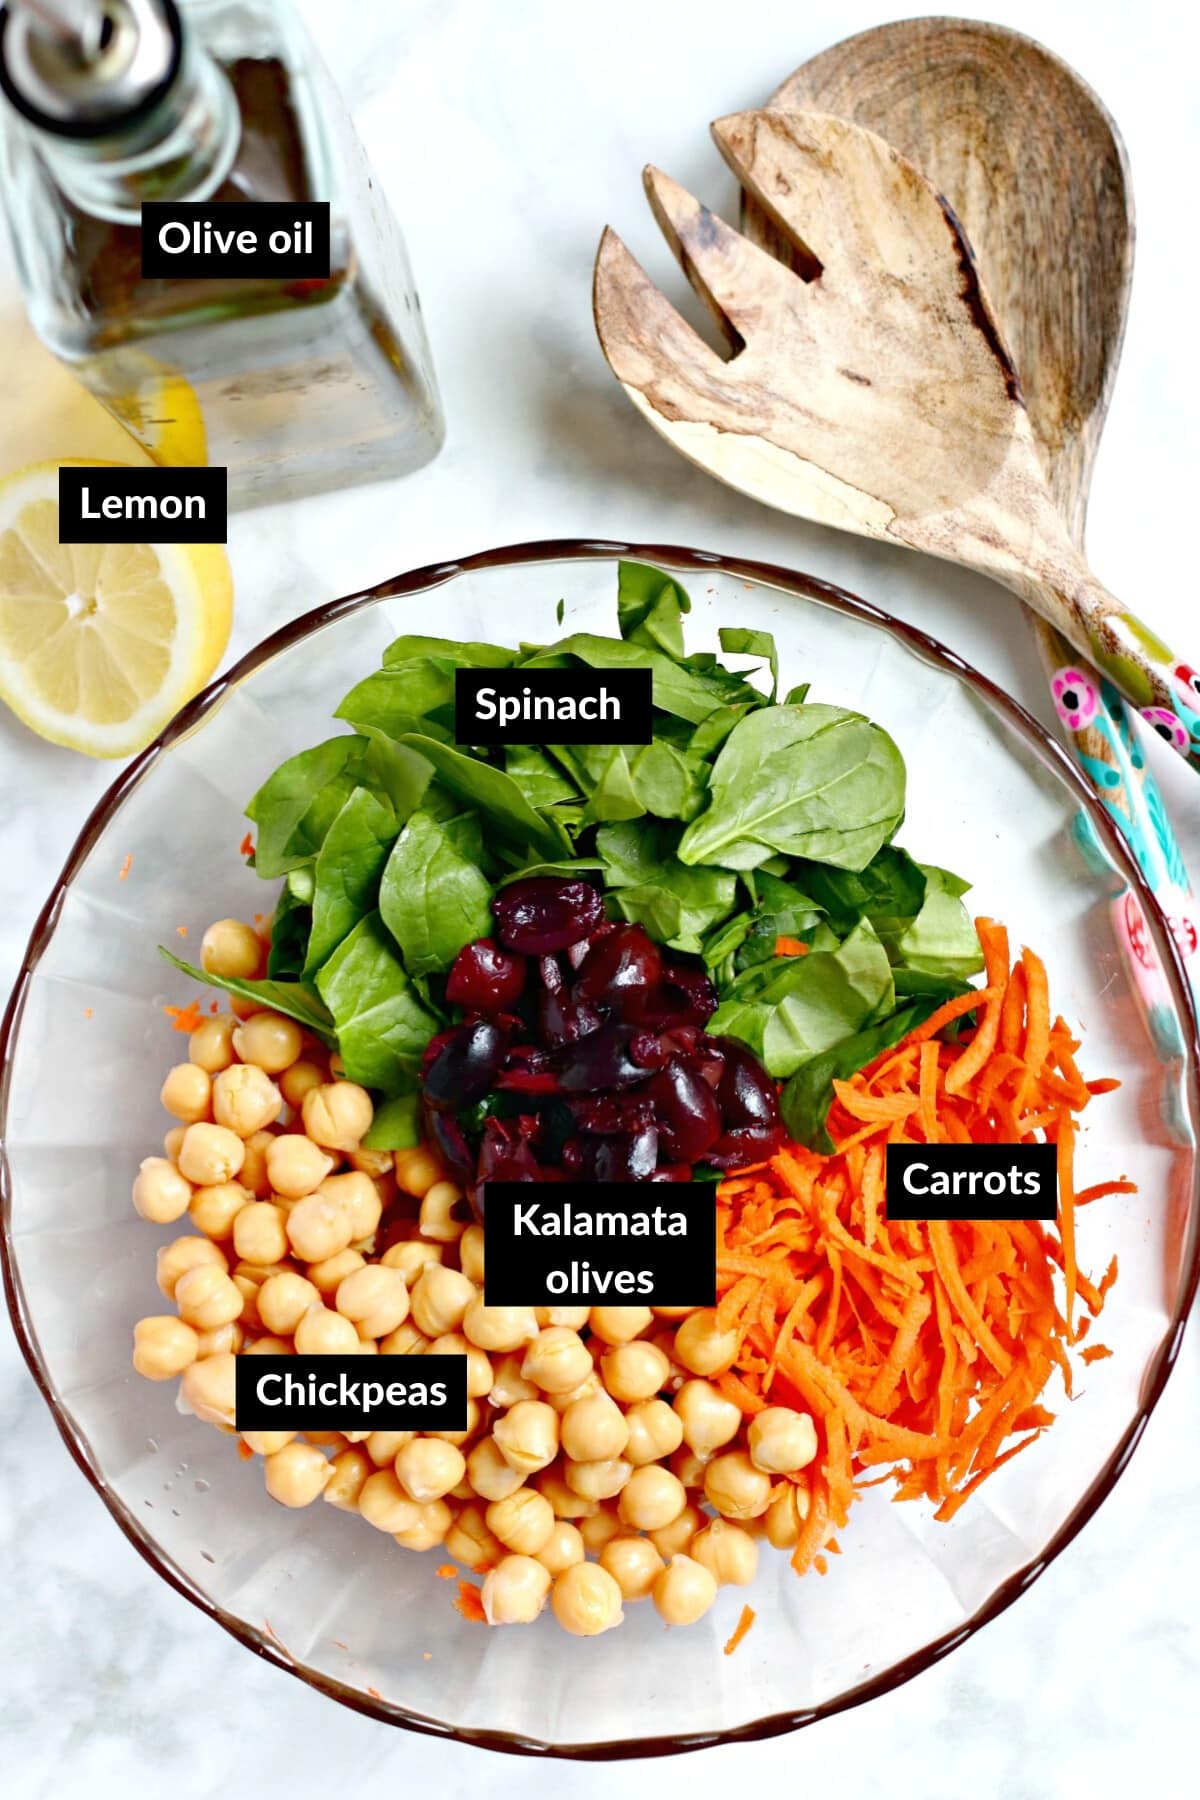 Image of labeled ingredients needed to make this recipe